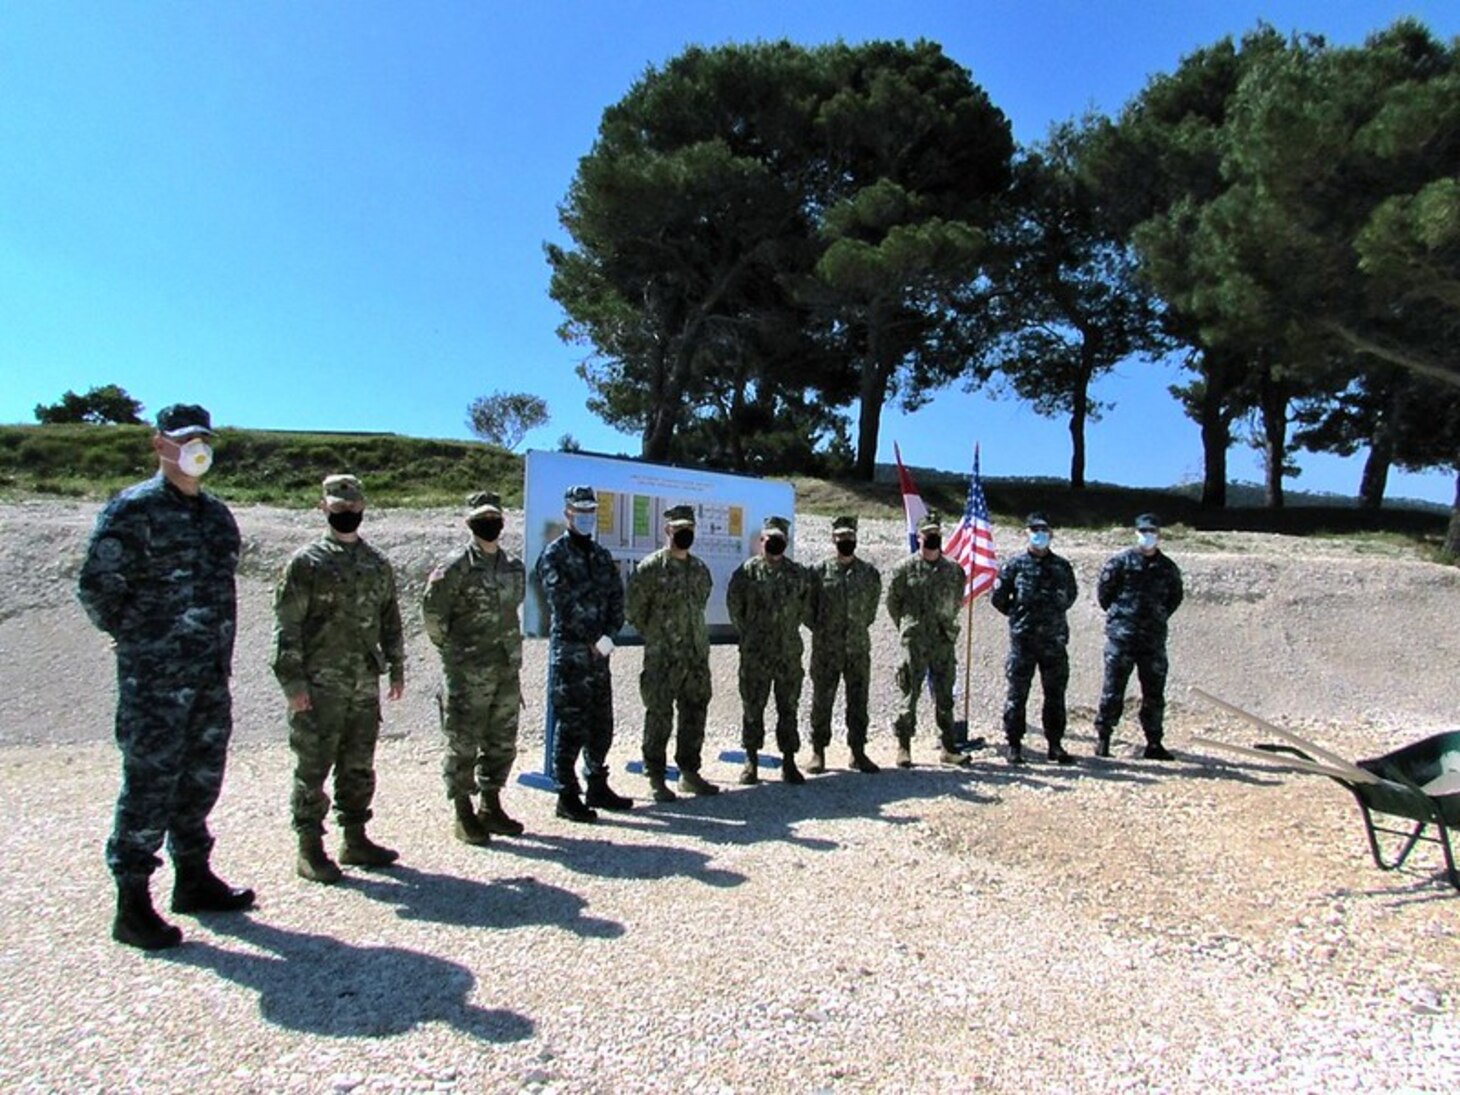 210417-N-NO901-0003 SPLIT, Croatia (April 17, 2021) The U.S. breaks ground with Ministry of Defense on a training facility at Lora Naval Base in Split, Croatia.  The groundbreaking ceremony marked the beginning of construction on a project with a total program value of nearly 10 million kuna, including construction, training, and equipment provided by the U.S. This facility will advance Croatia’s underwater mine-clearance capabilities, with the benefit of training by the U.S. Navy’s Sixth Fleet Explosive Ordinance Disposal Mobile Unit (EODMU8). Cooperation and joint training with Croatian mine-clearance divers enhances U.S.-Croatia interoperability at sea. The Croatian Navy contributes to increasing collective security and improved freedom of navigation through NATO and recent participation in Sea Guardian. This project bolsters the U.S.-Croatia partnership at sea and coordination between the U.S. Navy and Croatia’s Navy. (U.S. Navy photo courtesy U.S. Embassy Zagreb)